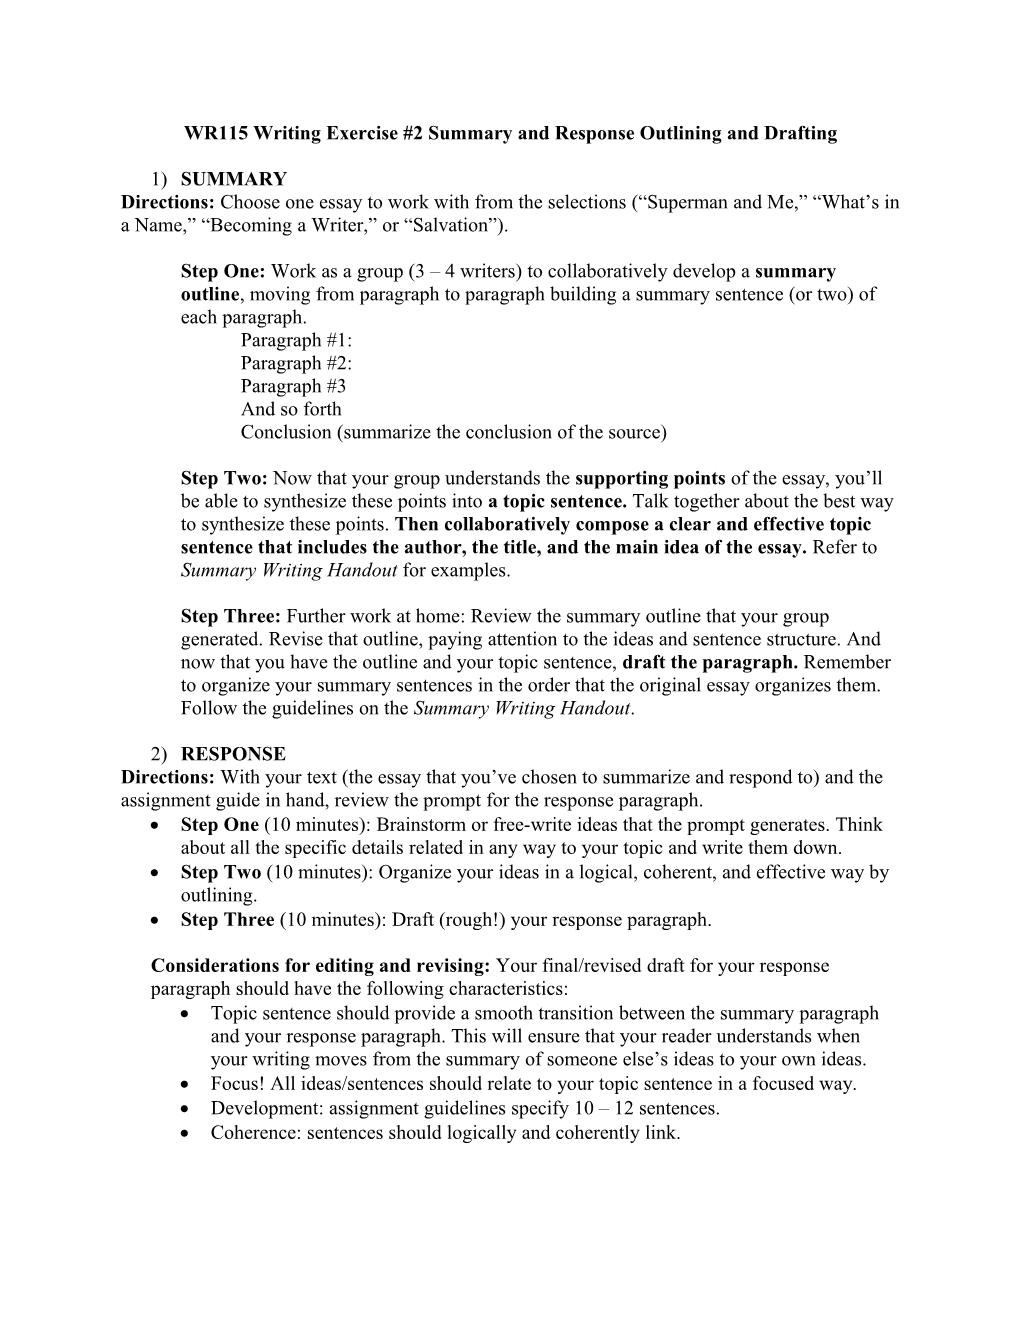 WR115 Writing Exercise #2 Summary and Response Outlining and Drafting